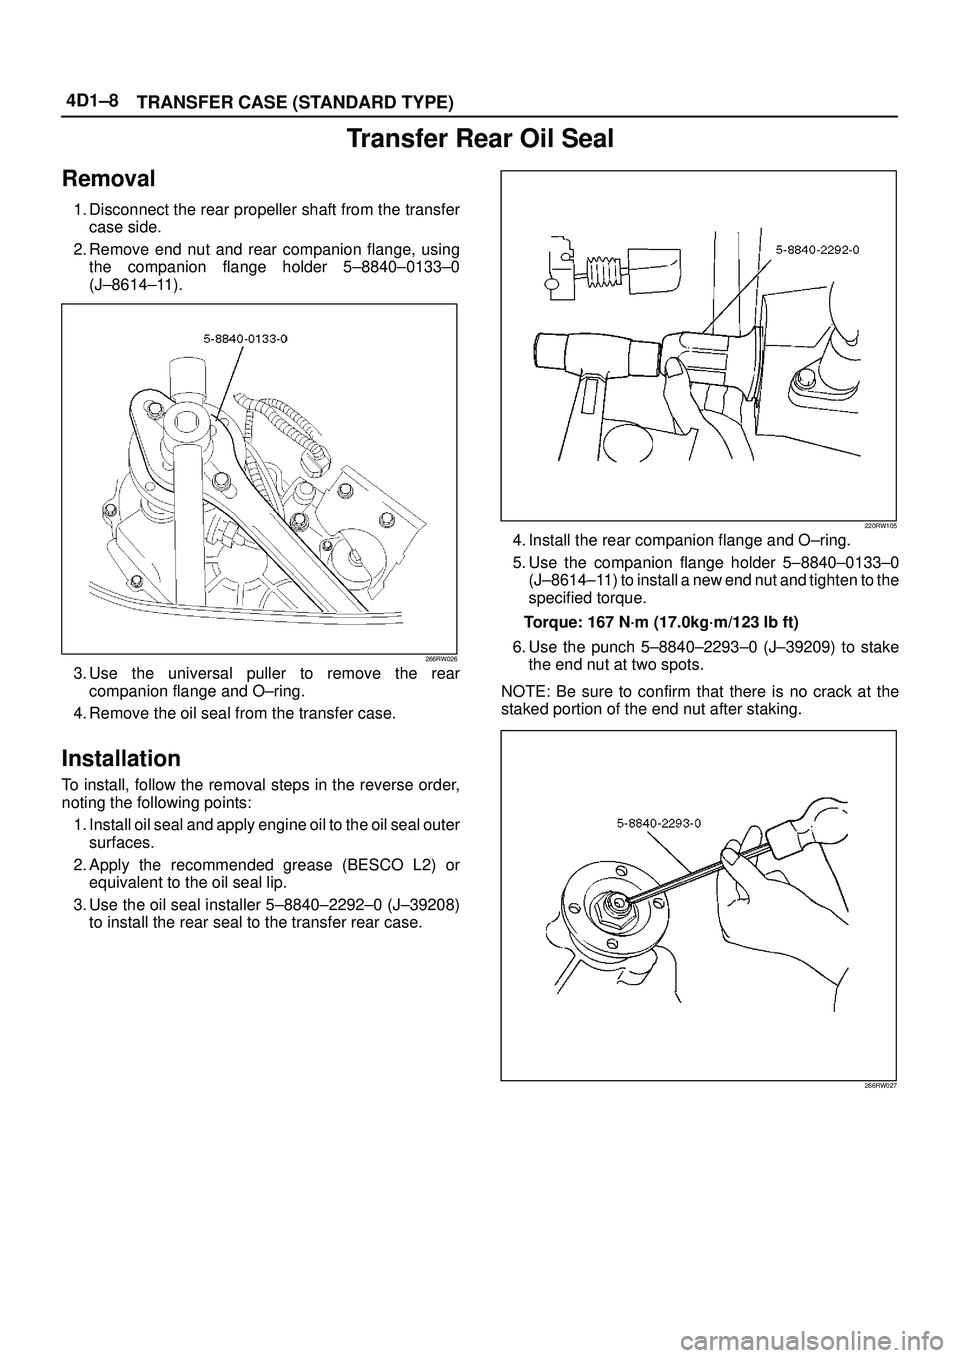 ISUZU TROOPER 1998  Service Repair Manual 4D1±8
TRANSFER CASE (STANDARD TYPE)
Transfer Rear Oil Seal
Removal
1. Disconnect the rear propeller shaft from the transfer
case side.
2. Remove end nut and rear companion flange, using
the companion